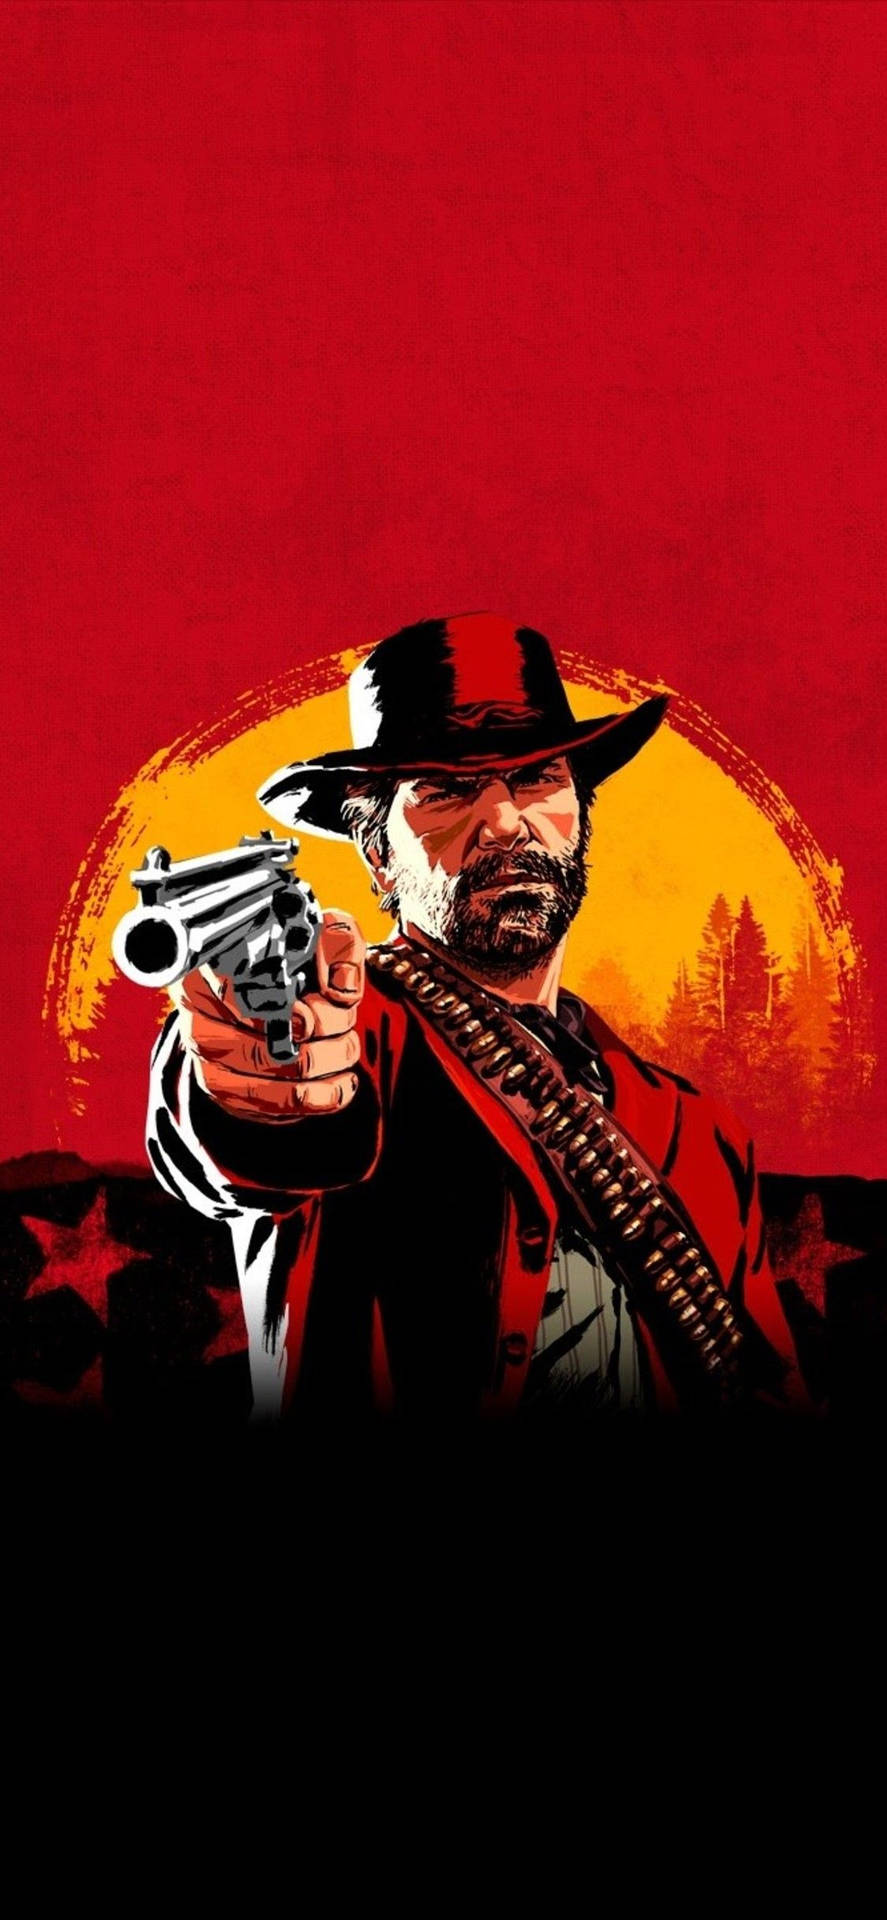 Red Dead Redemption 2 Wallpapers